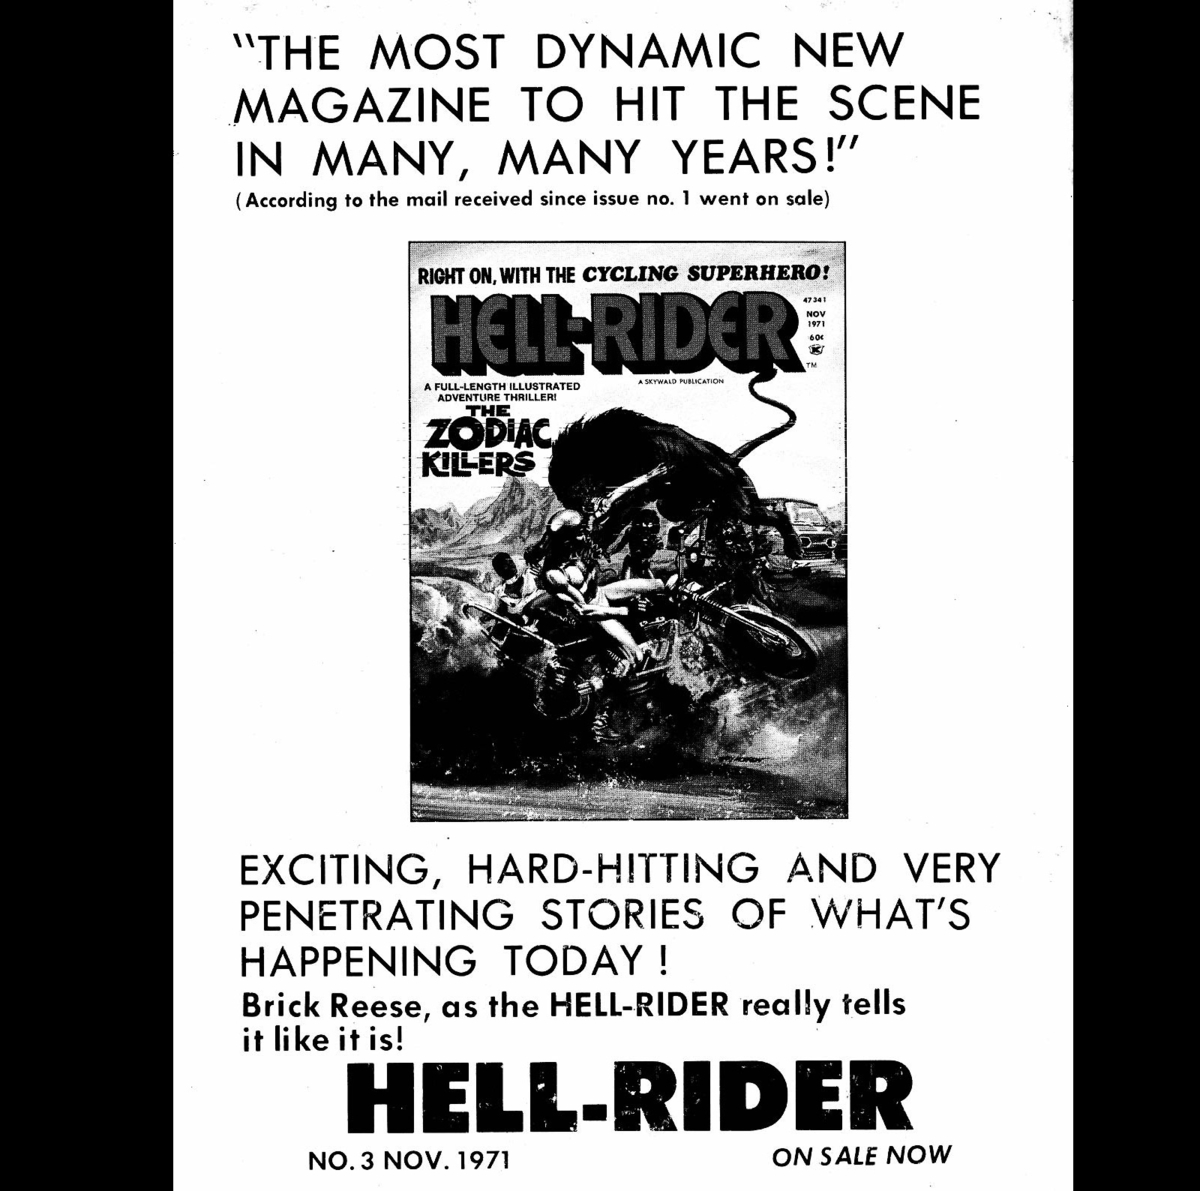 Skywald Publications 'Psycho' #5 Advertisement for 'Hell-Rider' #3